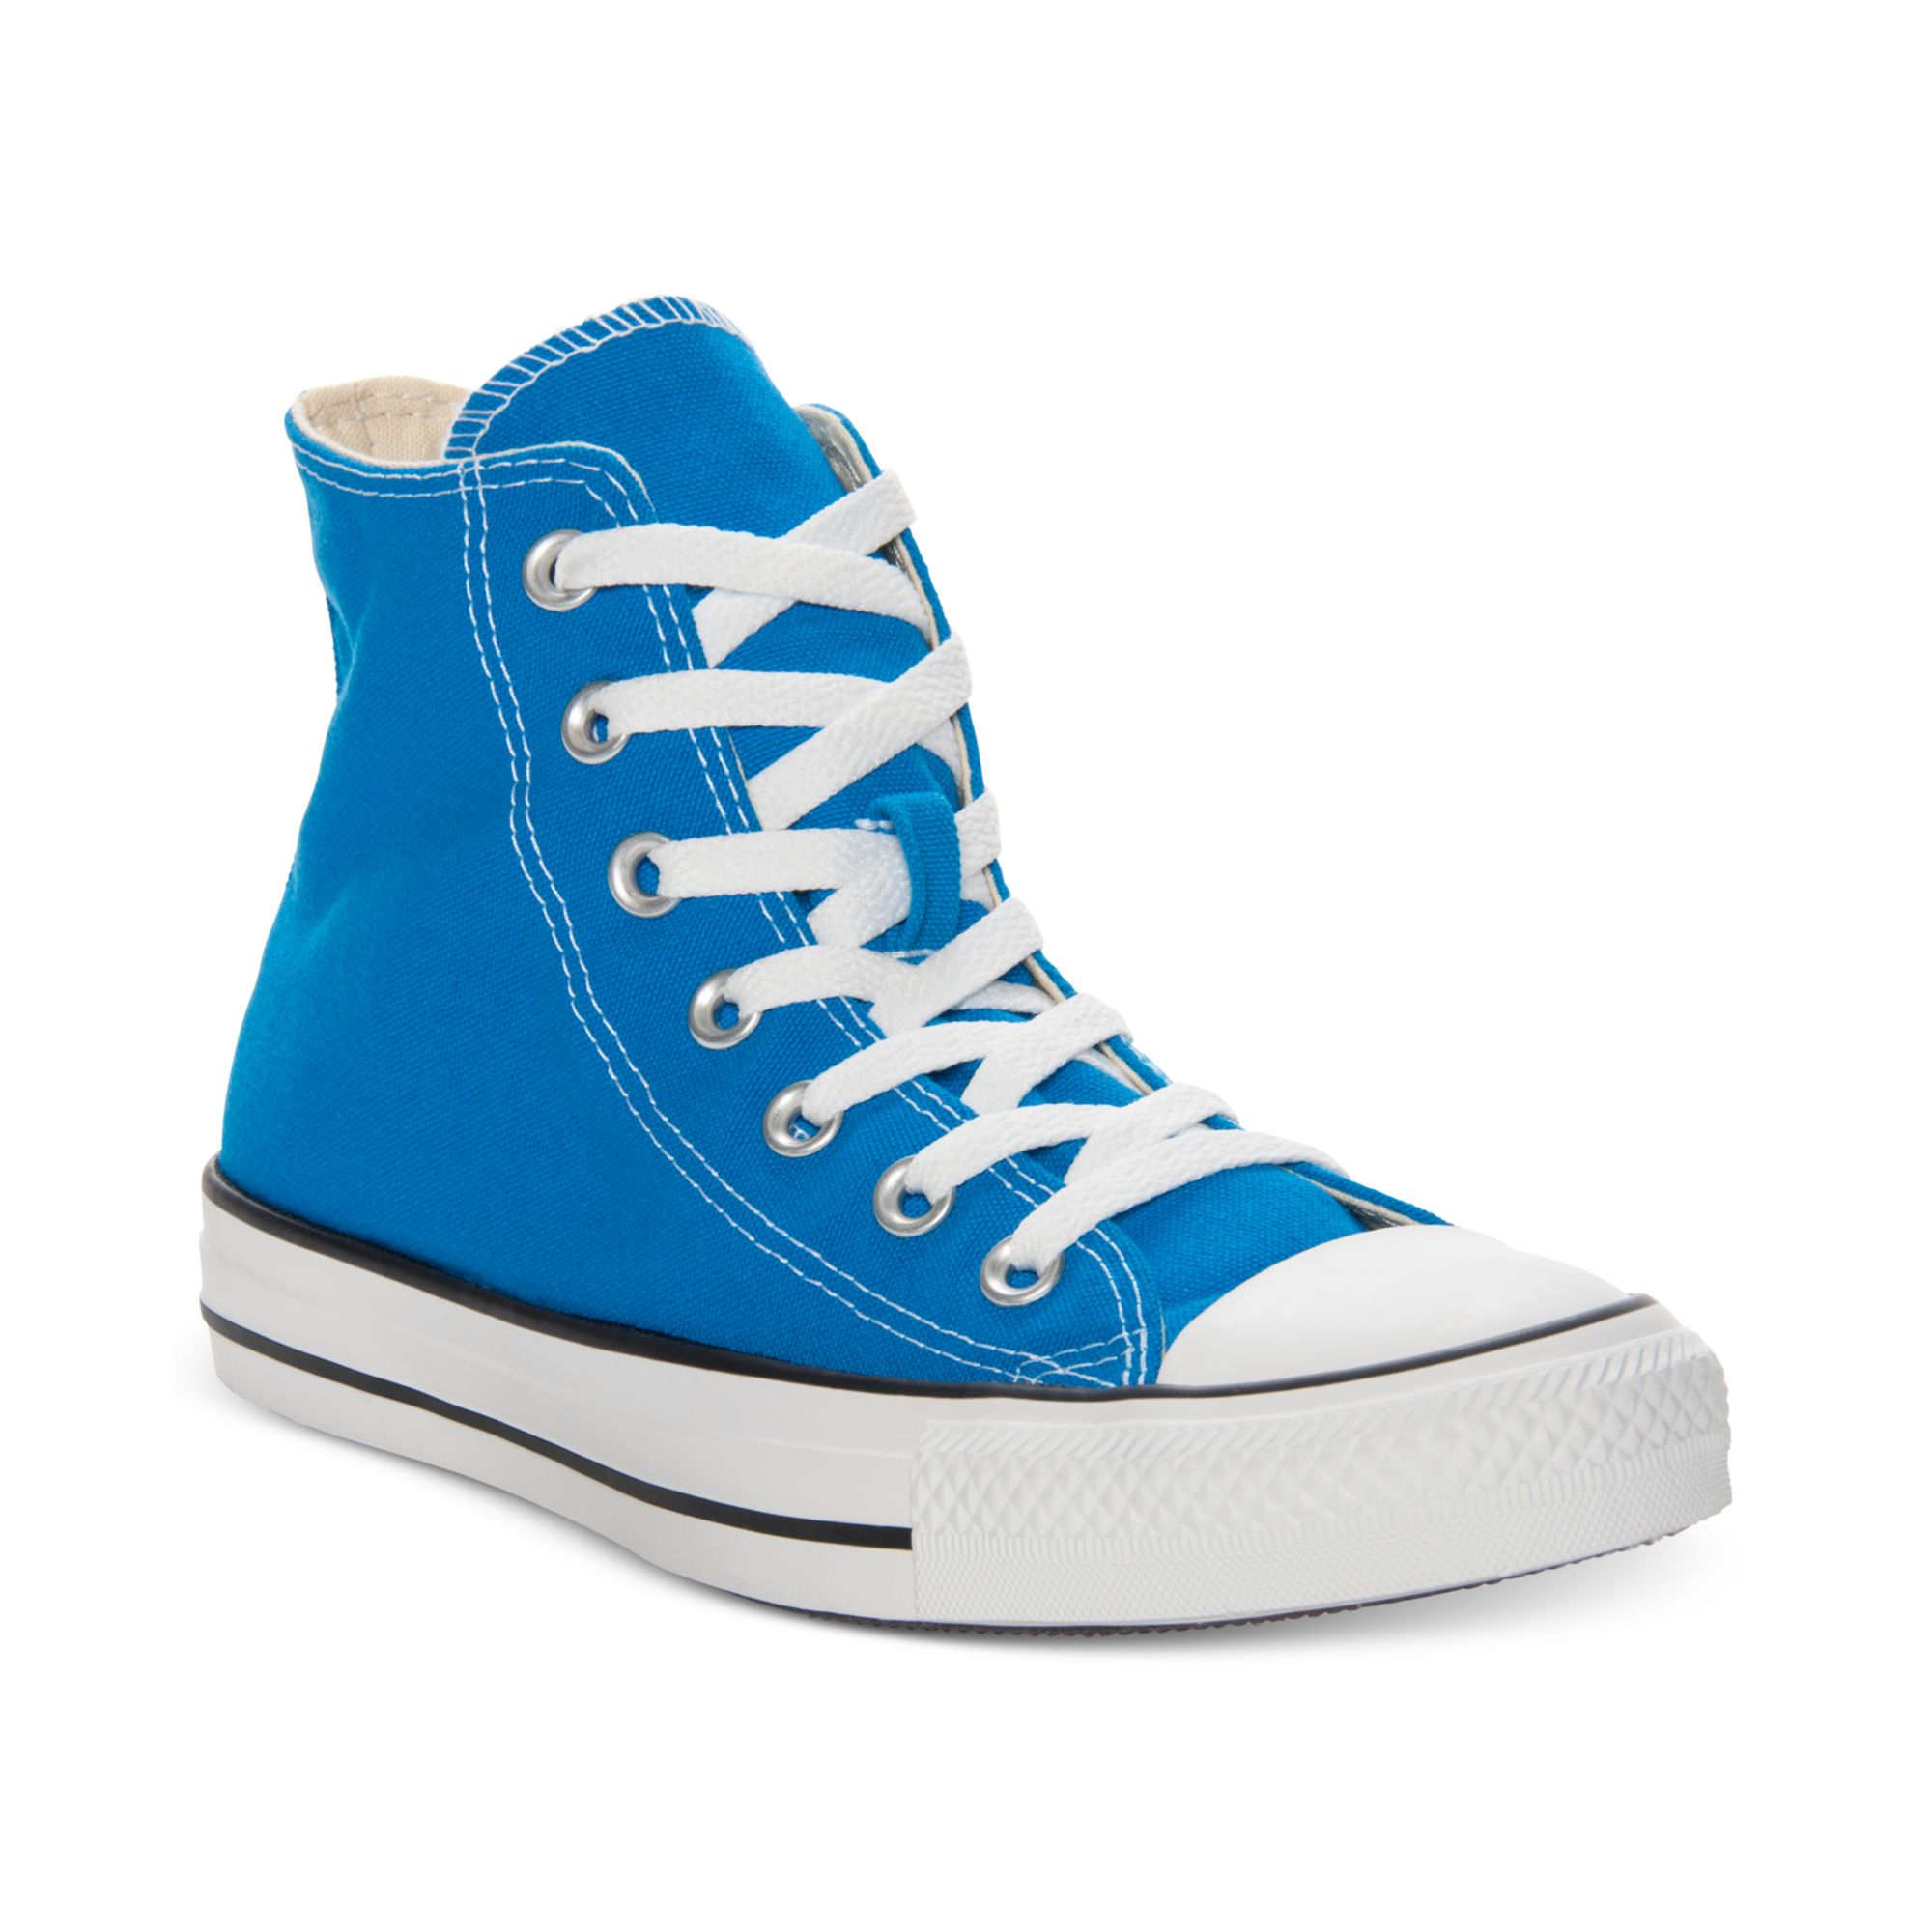 Lyst - Converse Chuck Taylor Hi Top Casual Sneakers in Blue for Men